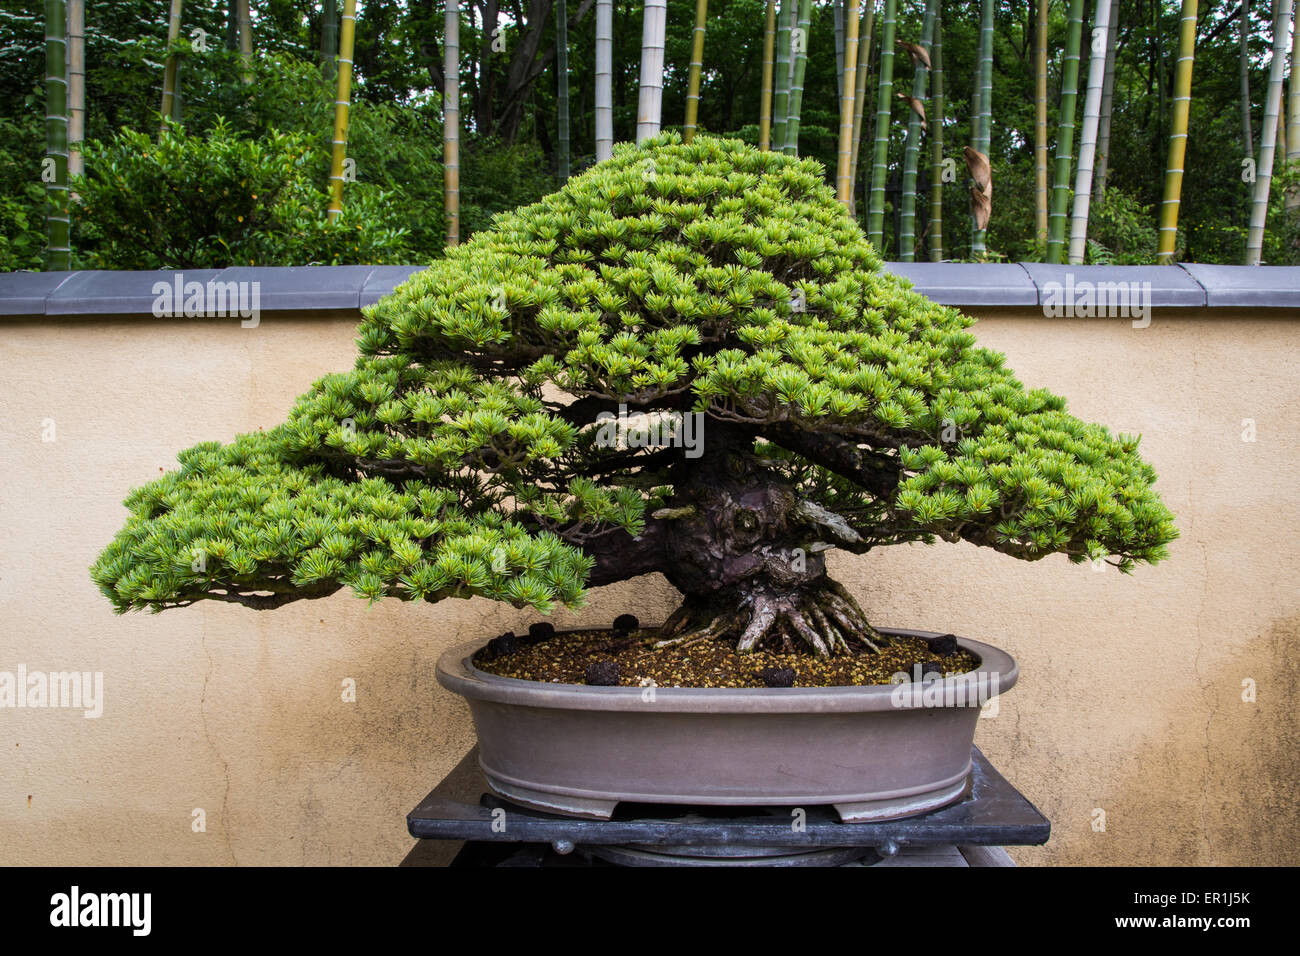 Bonsai is a Japanese art form using miniature trees grown in containers. Stock Photo